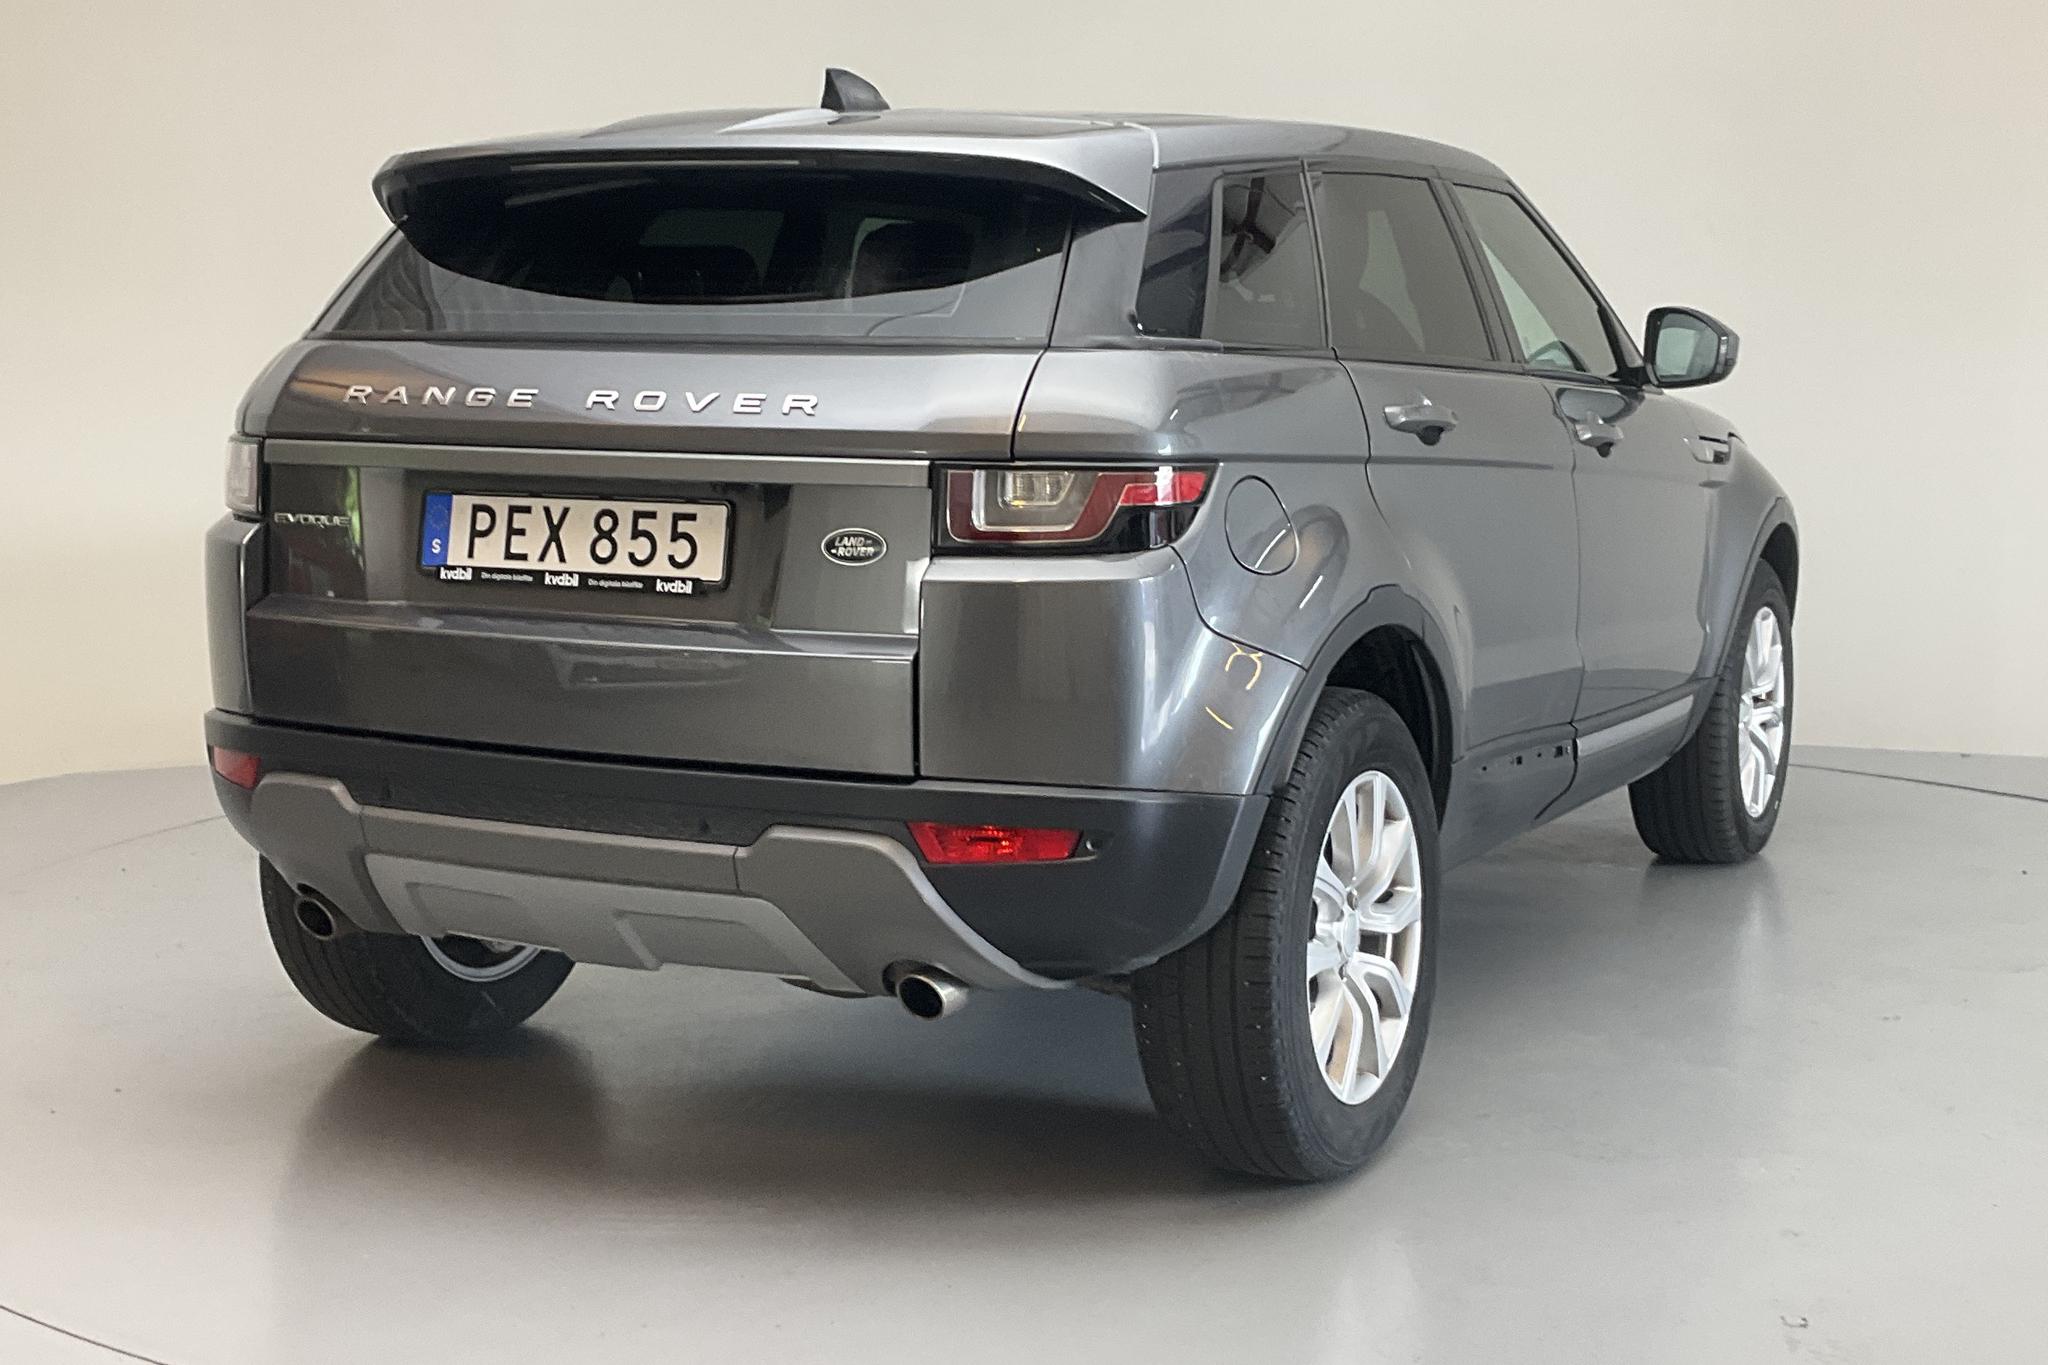 Land Rover Range Rover Evoque 2.0 TD4 AWD 5dr (180hk) - 105 830 km - Automatic - gray - 2017